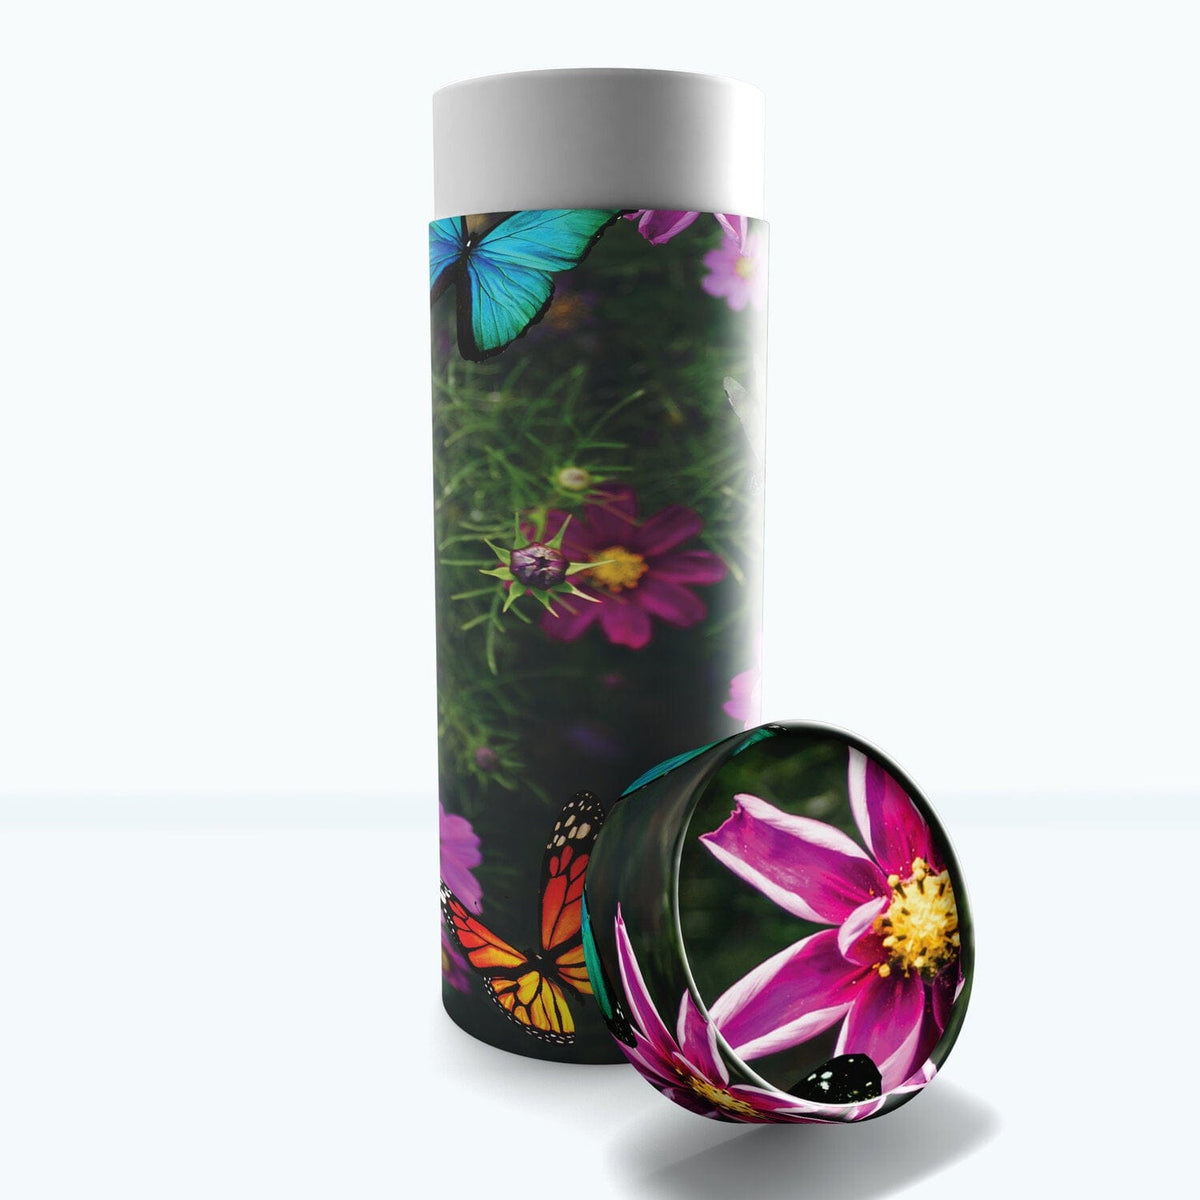 Commemorative Cremation Urns Small Magical Garden - Biodegradable &amp; Eco Friendly Burial or Scattering Urn / Tube